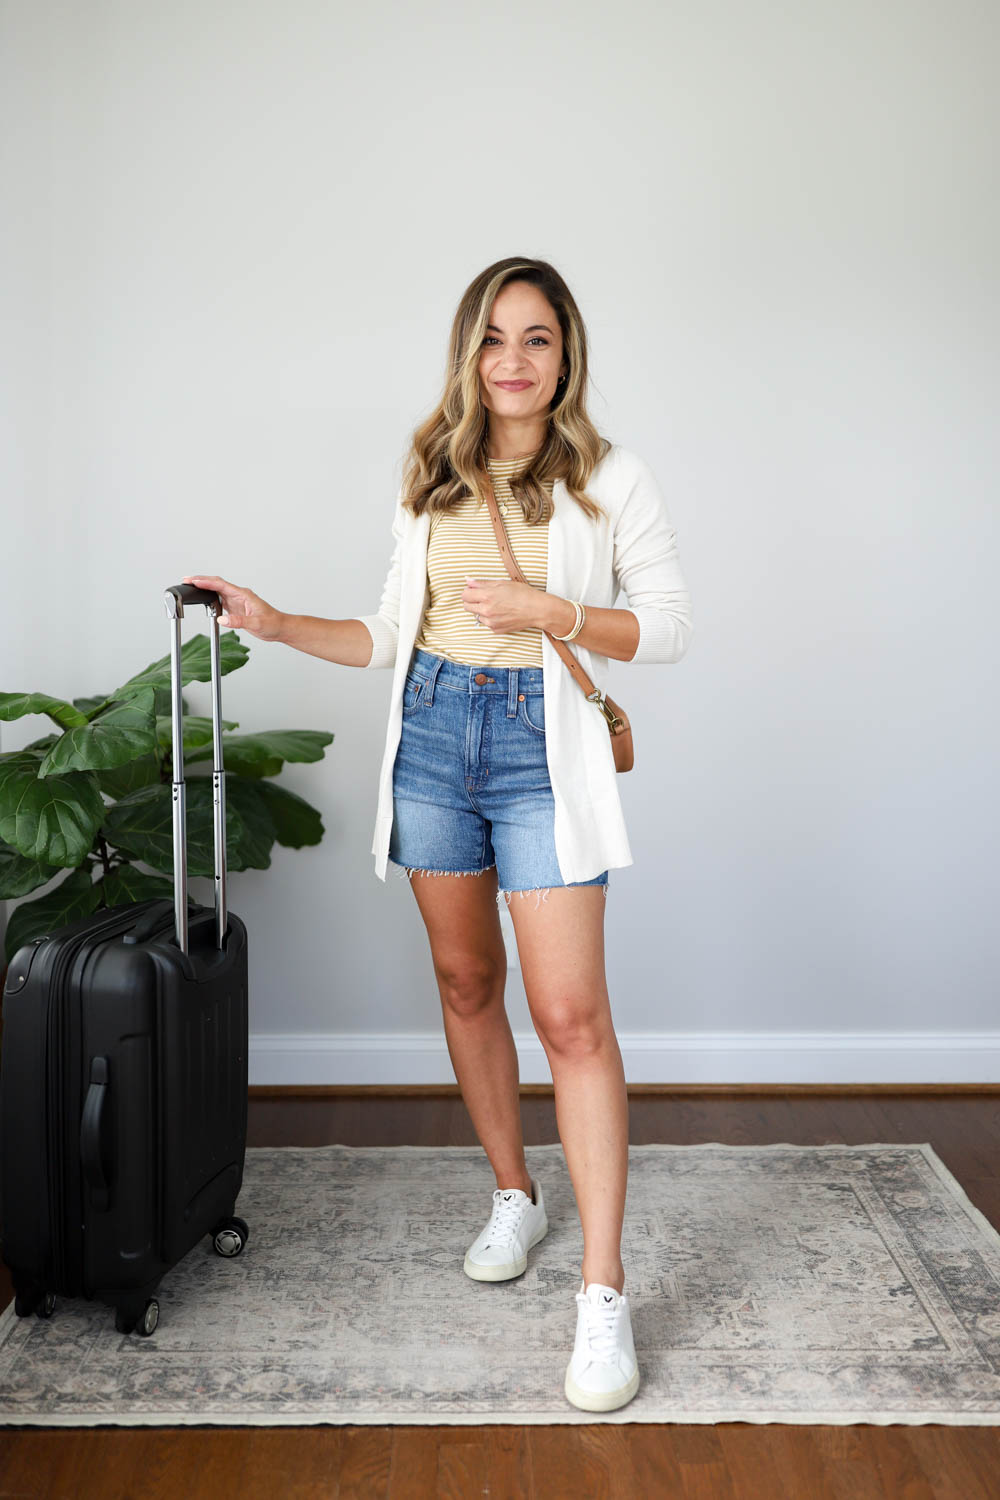 Comfortable Travel Outfits Ideas for Women